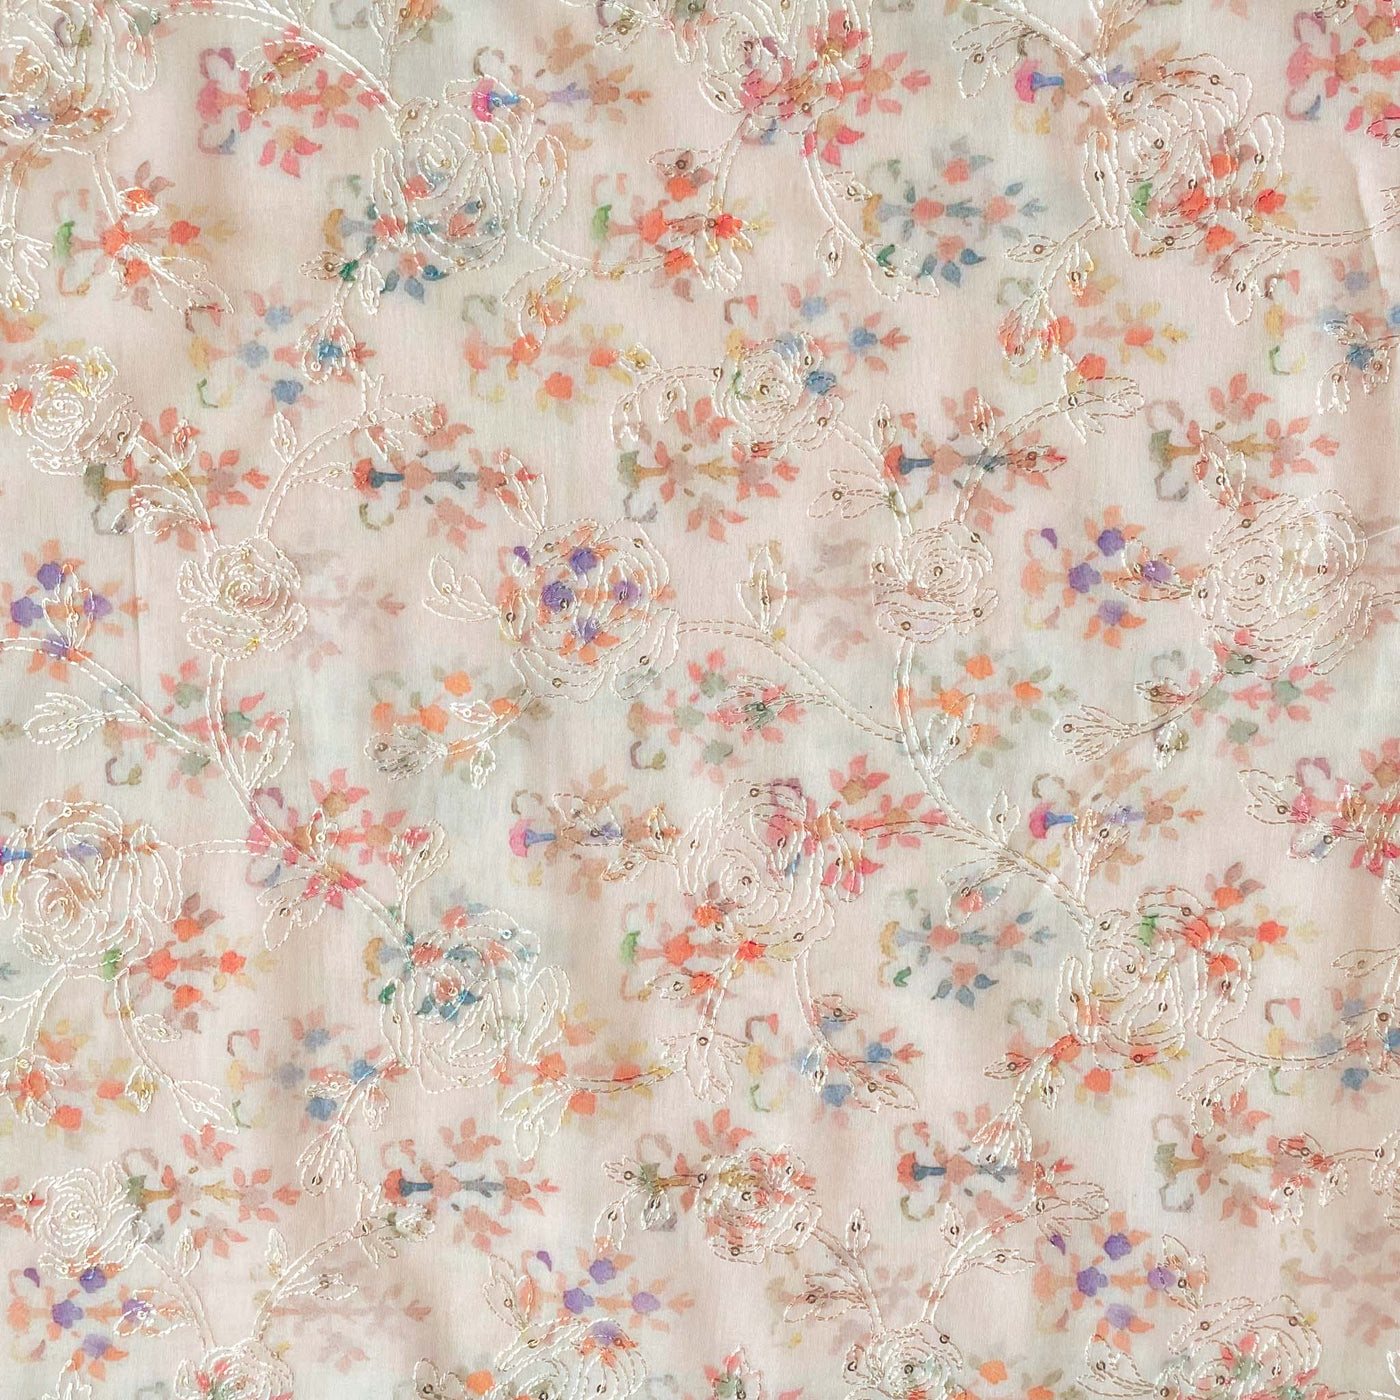 Fabric Pandit Cut Piece (CUT PIECE) Peach & Multi-color Brush Paint Florals Digital Printed Embroidered Cotton Fabric (Width 43 Inches)